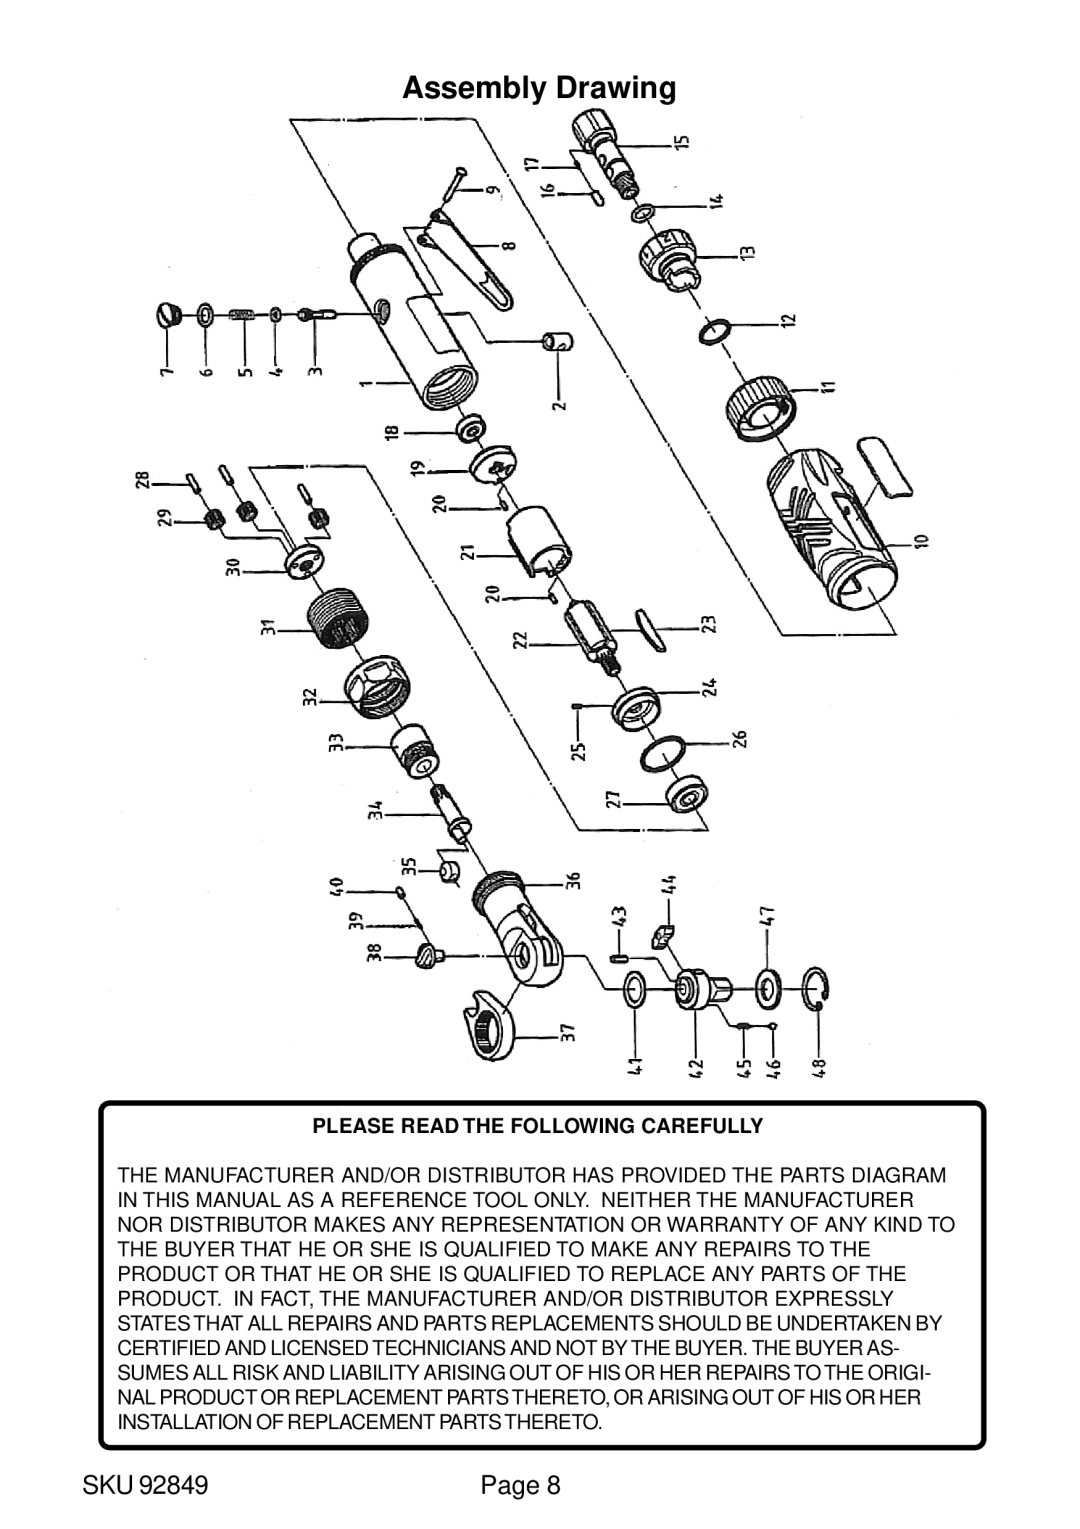 Harbor Freight Tools 92849 operating instructions Assembly Drawing, Please Read the Following Carefully 